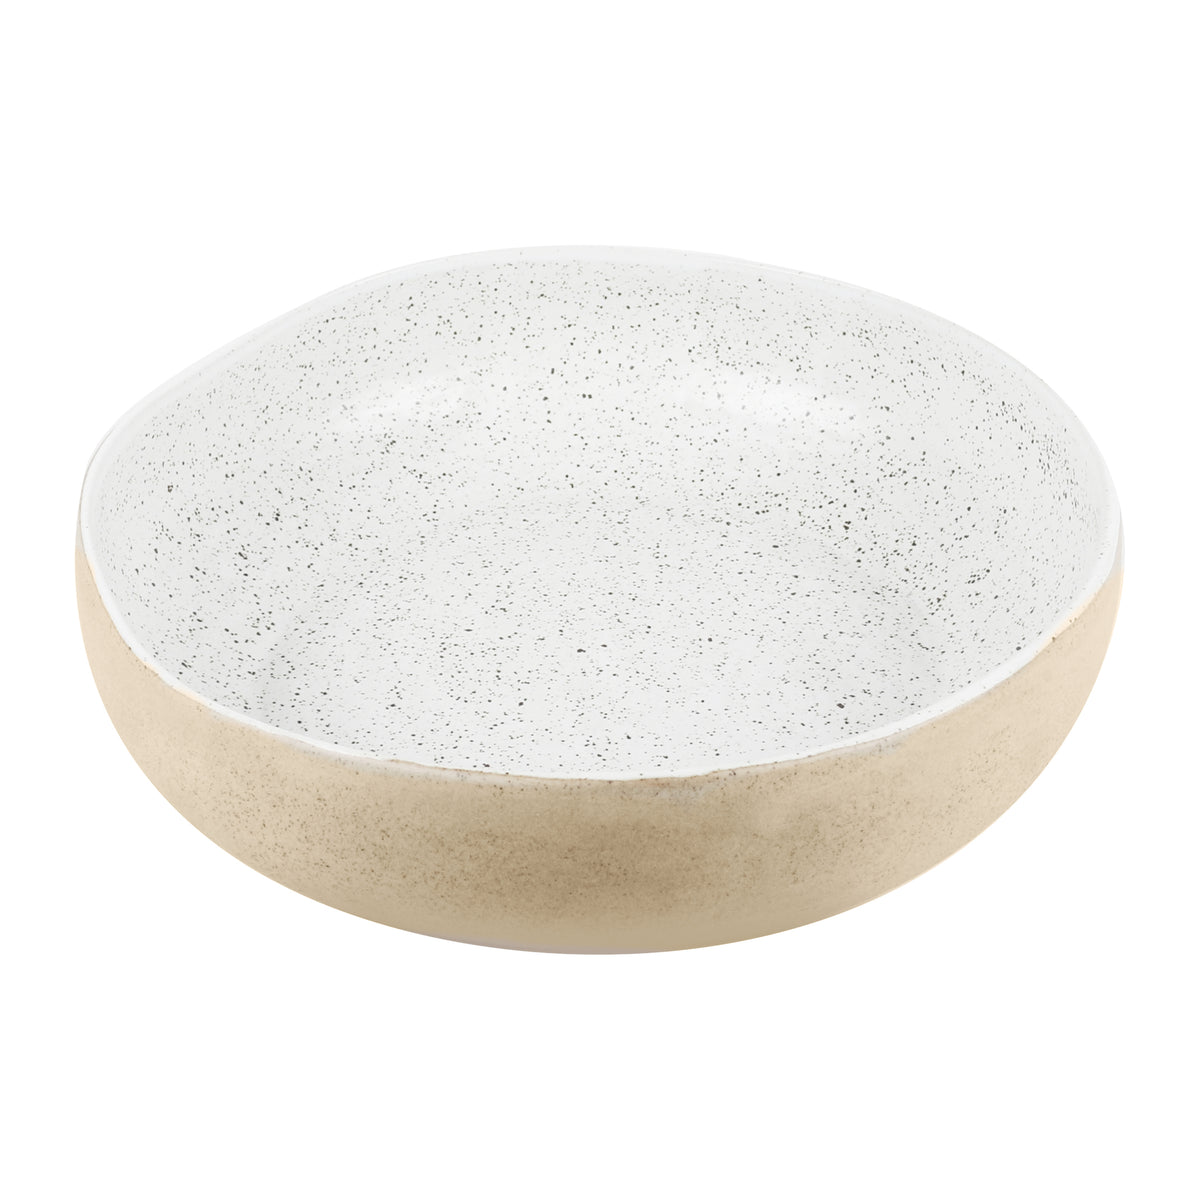 Garden to Table Large Salad Bowl